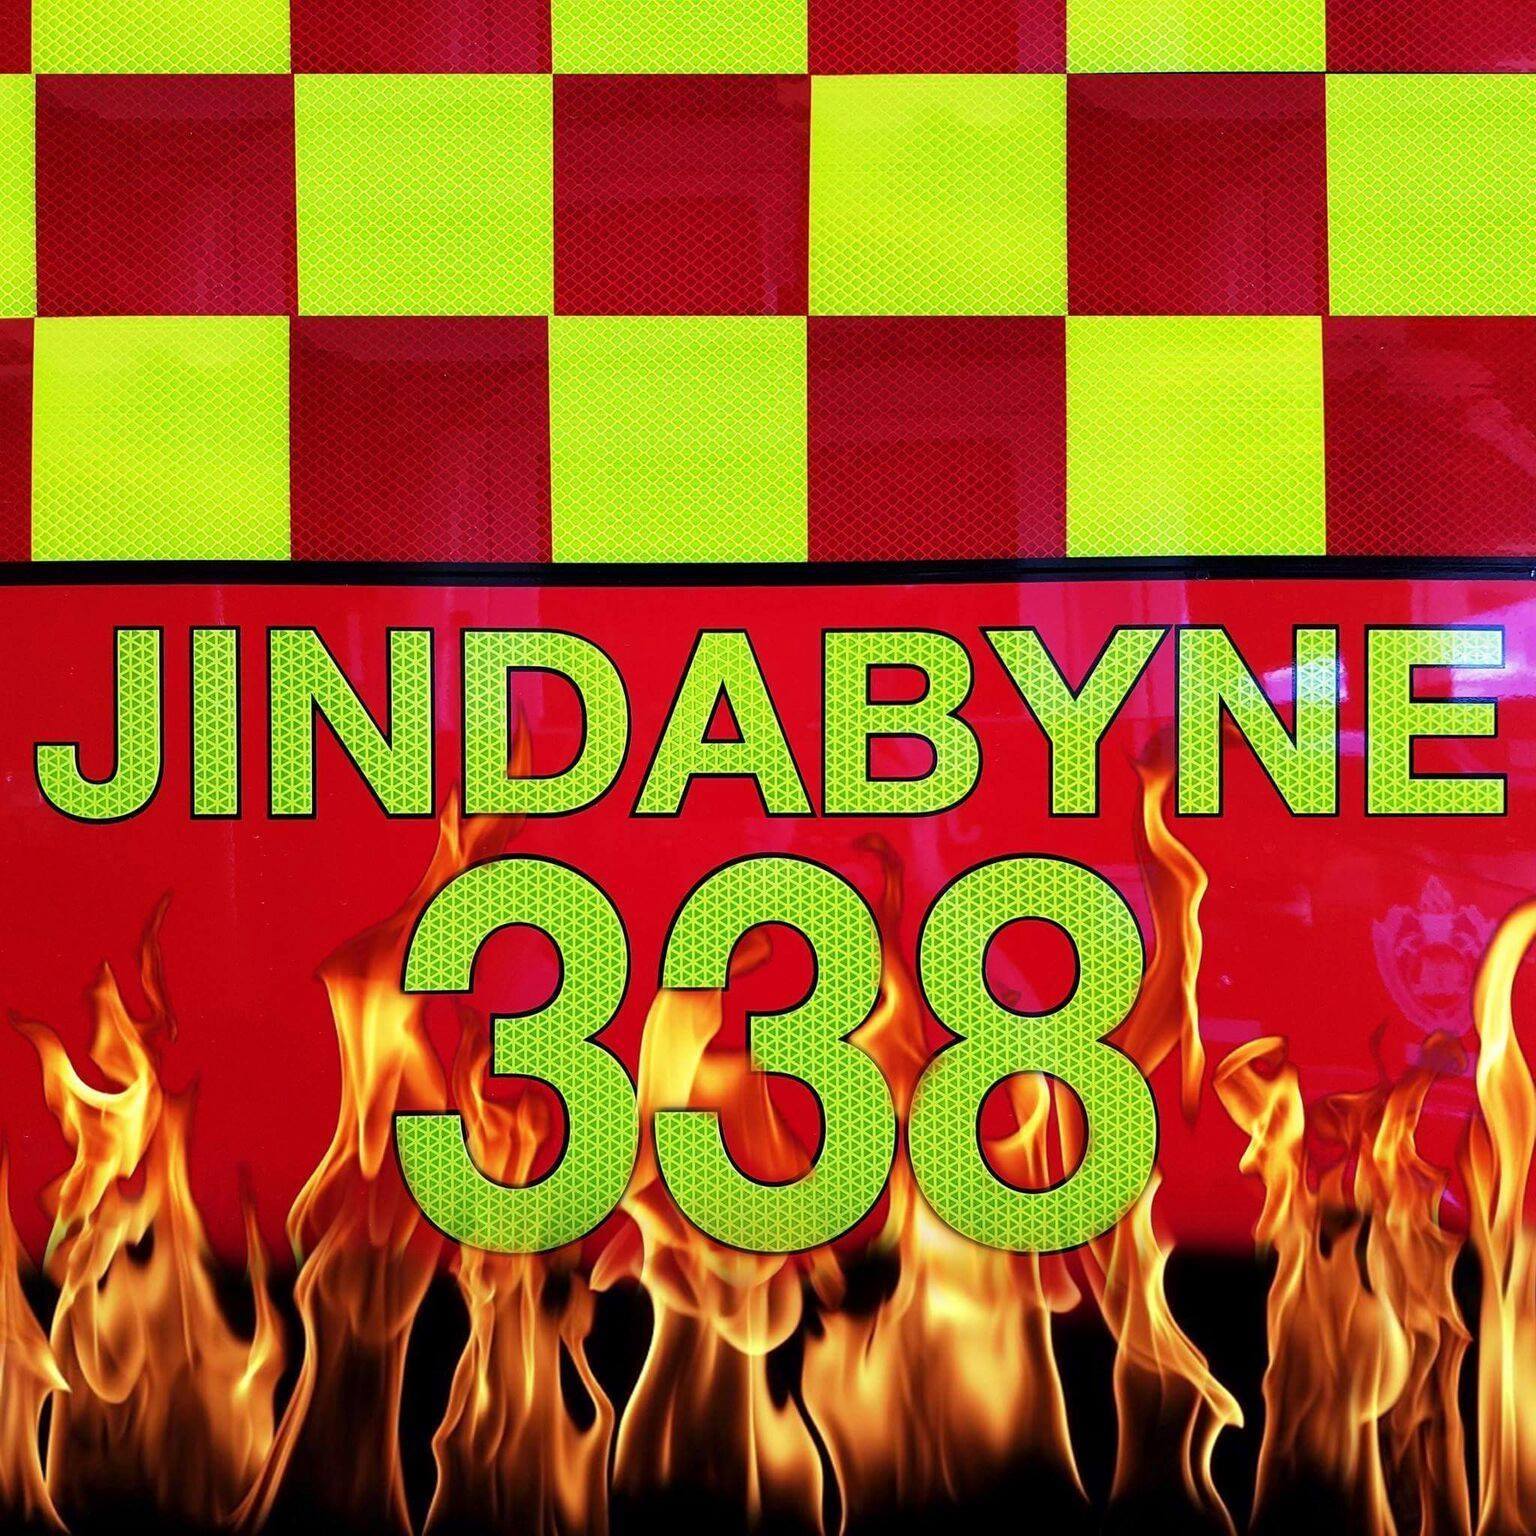 Fire and Rescue NSW Station 338 Jindabyne logo